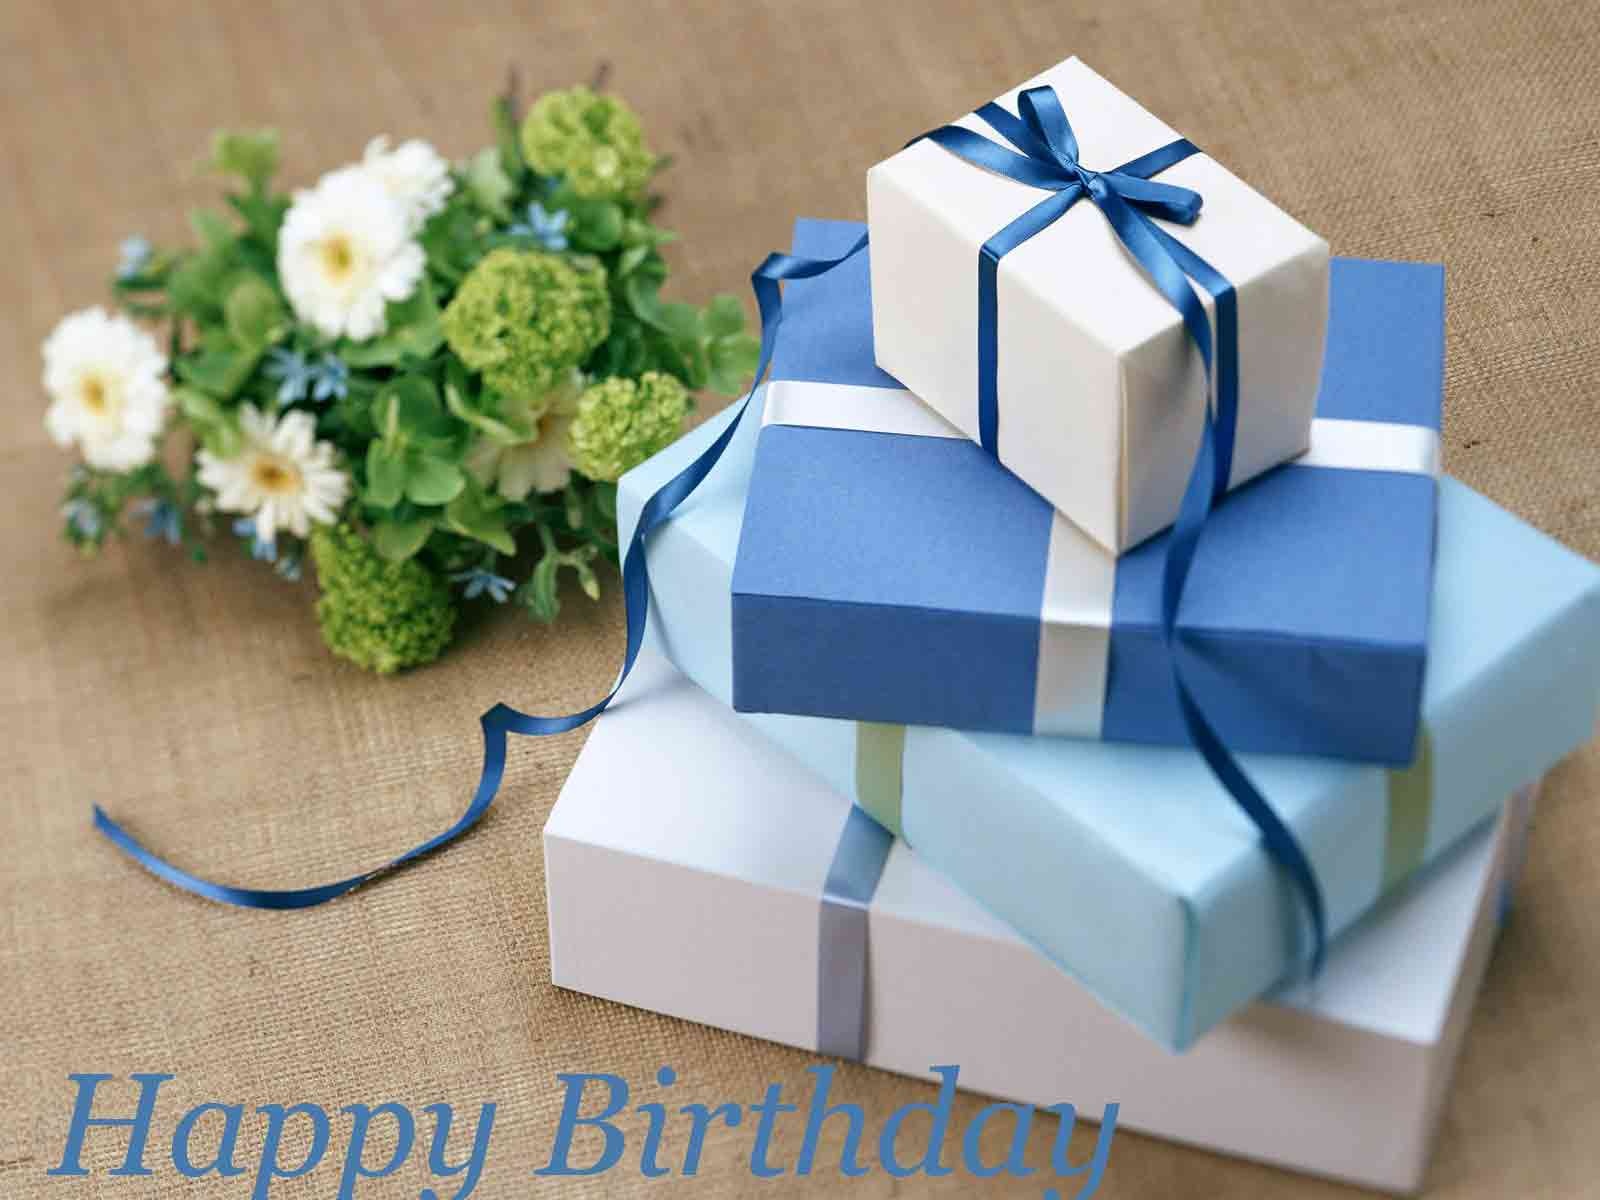 Lovely and Beautiful Birthday Wishes to Make Your Girlfriend Happy on Her Birthday 3